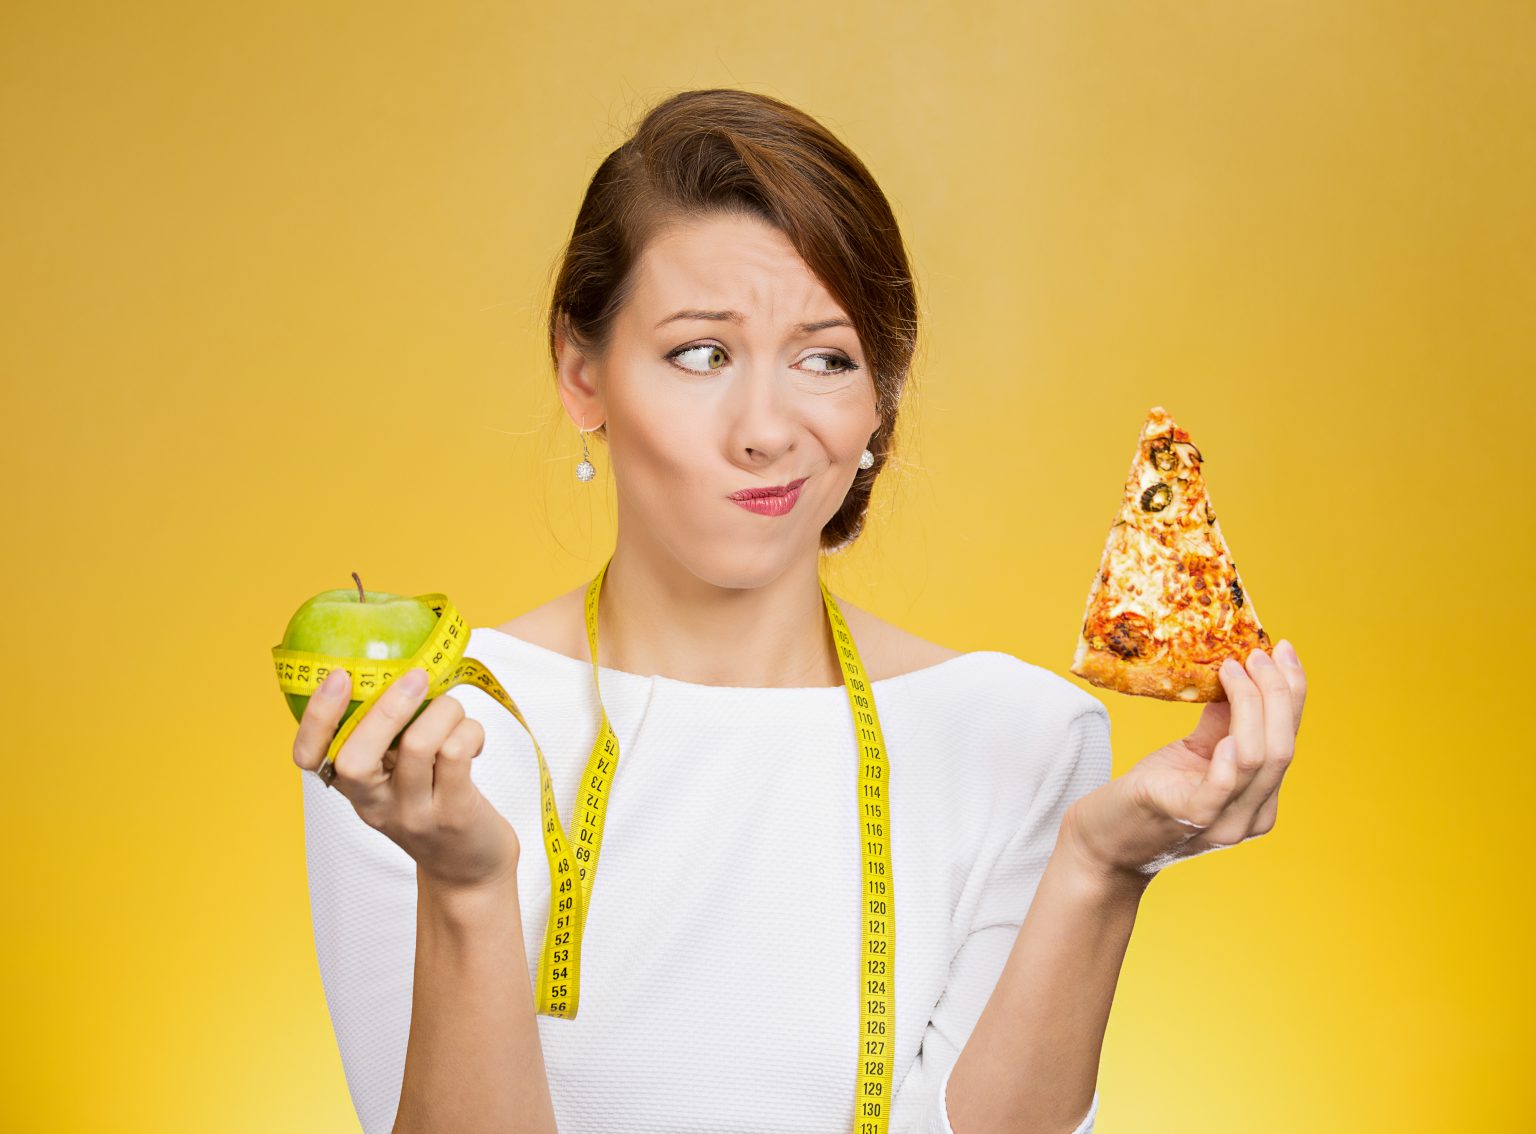 Woman with a measuring tape fighting with food cravings